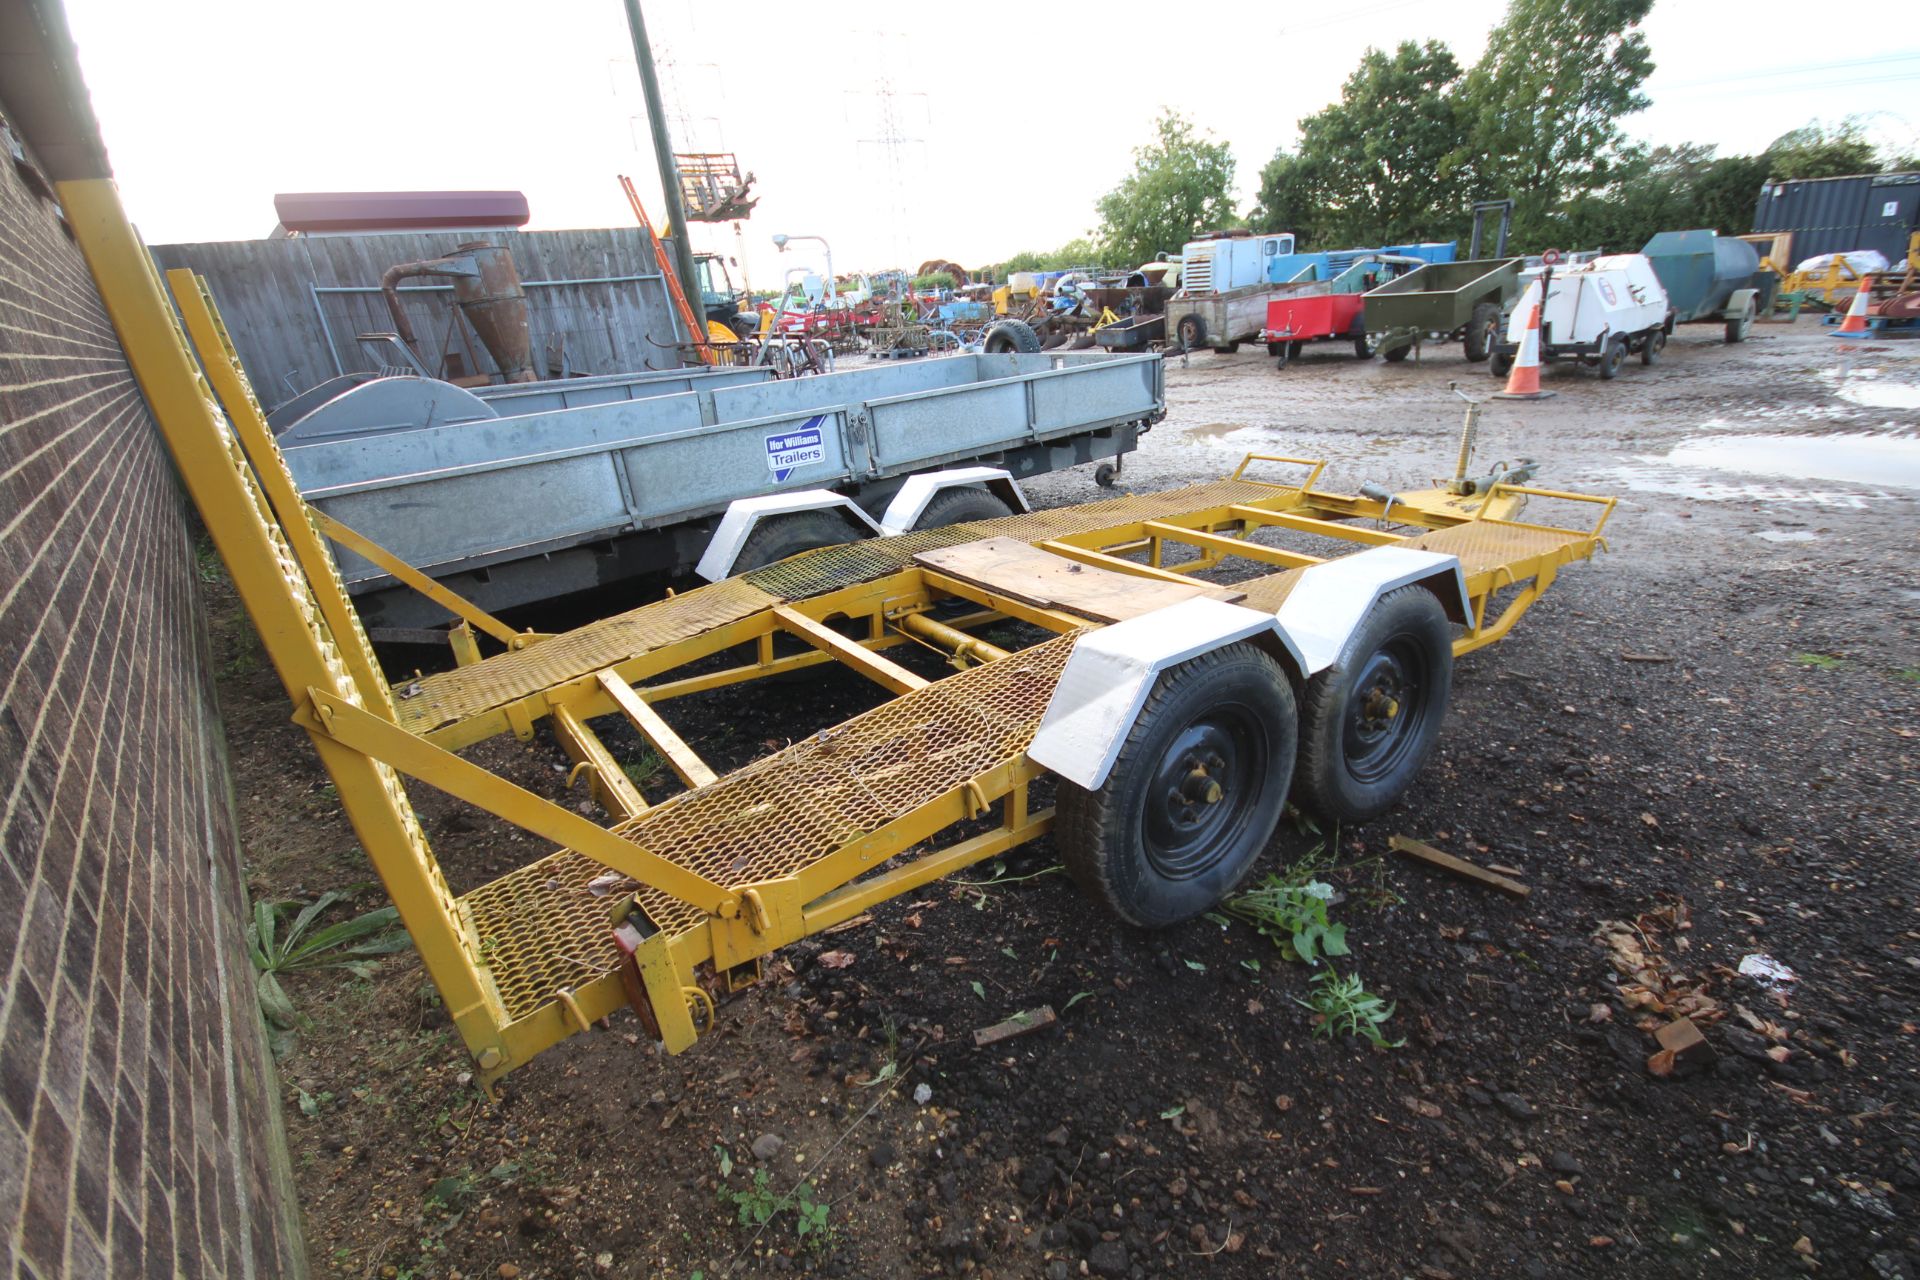 14ft x 6ft twin axle car transporter trailer. With ramps. - Image 4 of 15